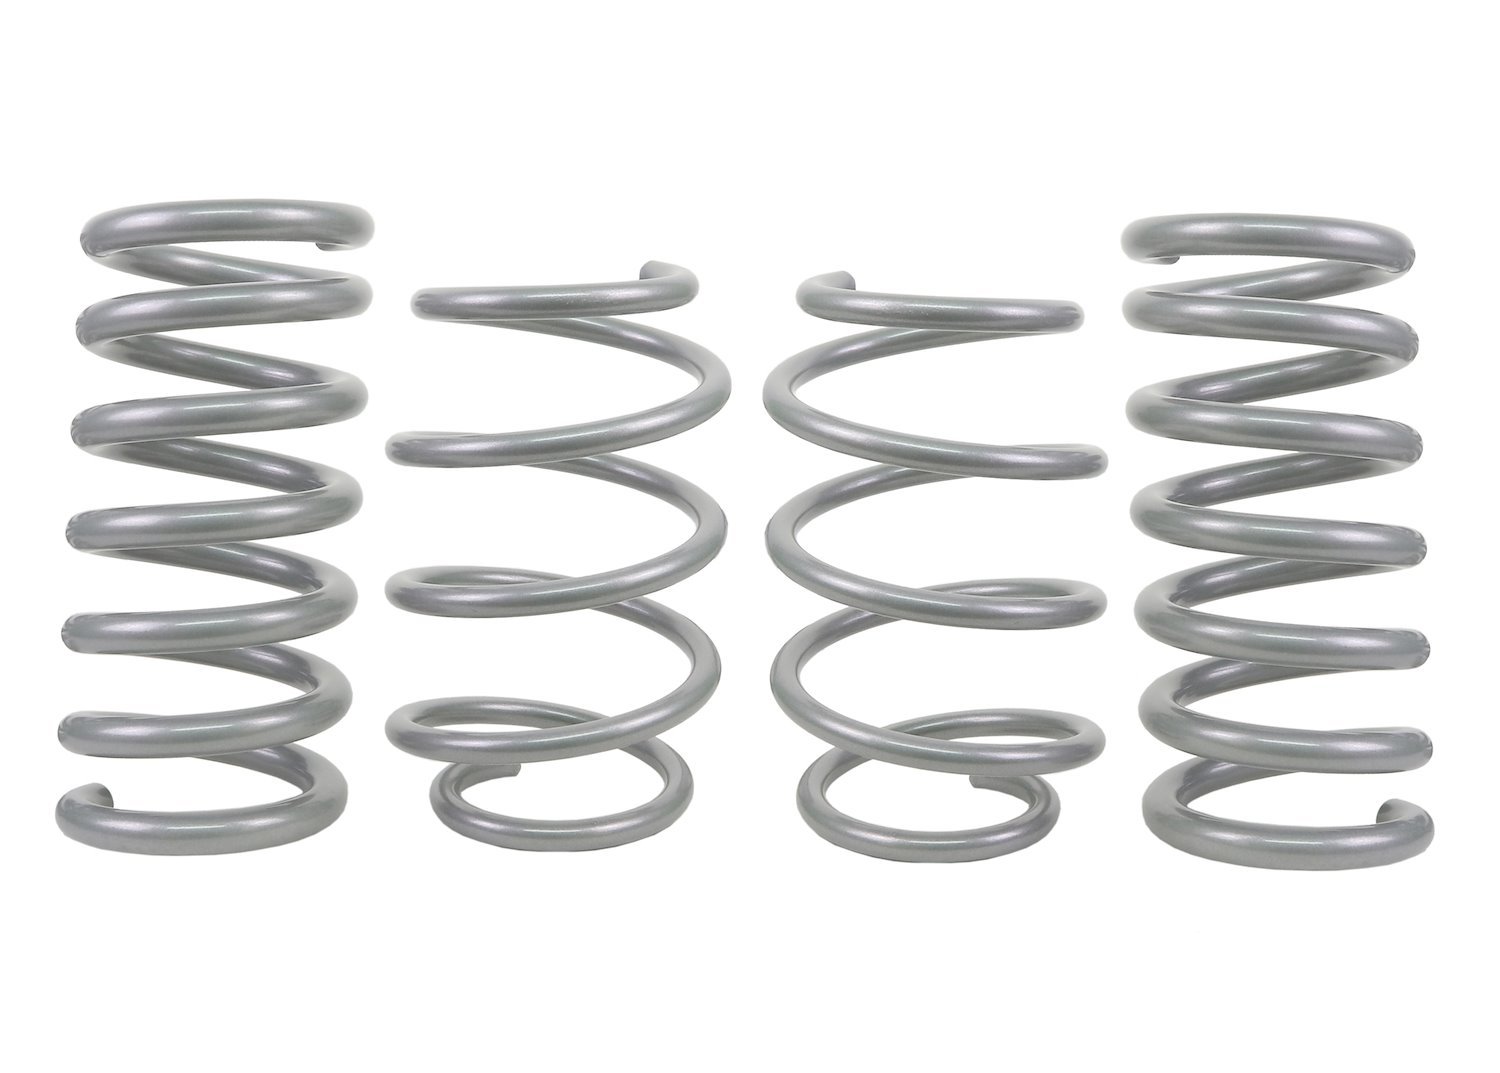 WSK-FRD006 Performance Lowering Springs for 2015 Ford Mustang GT S550